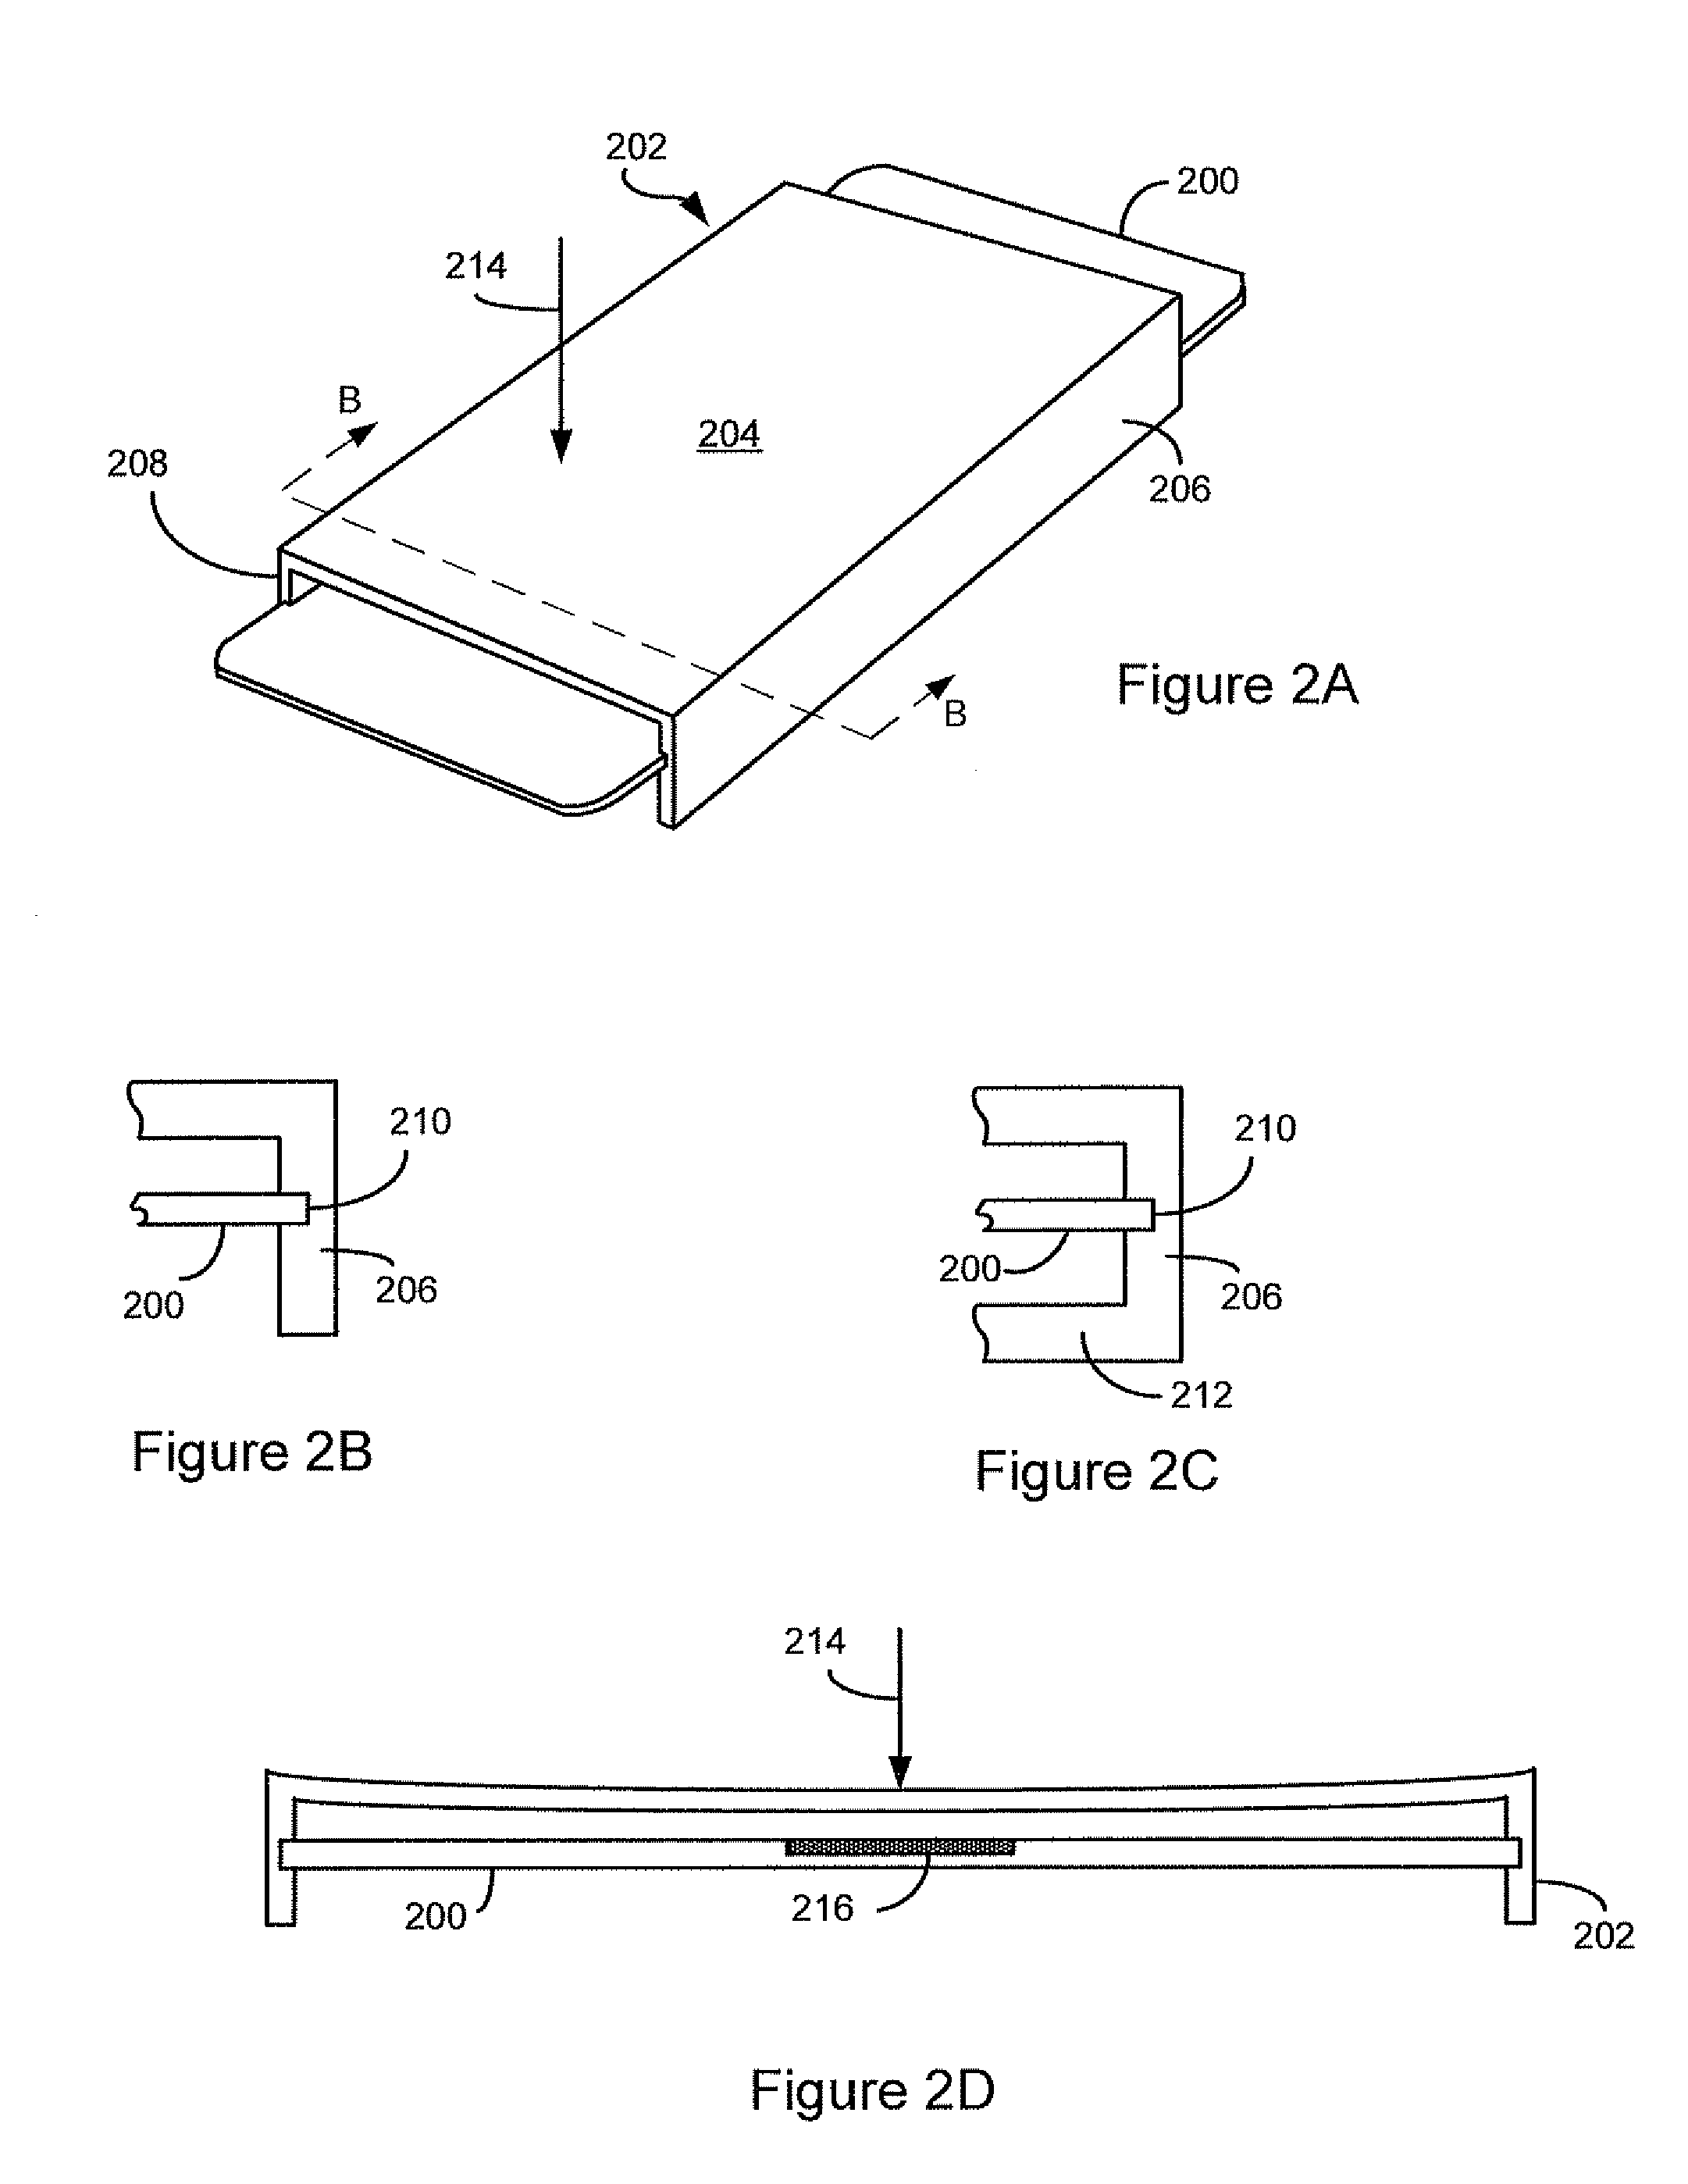 Mailing apparatus for powered cards